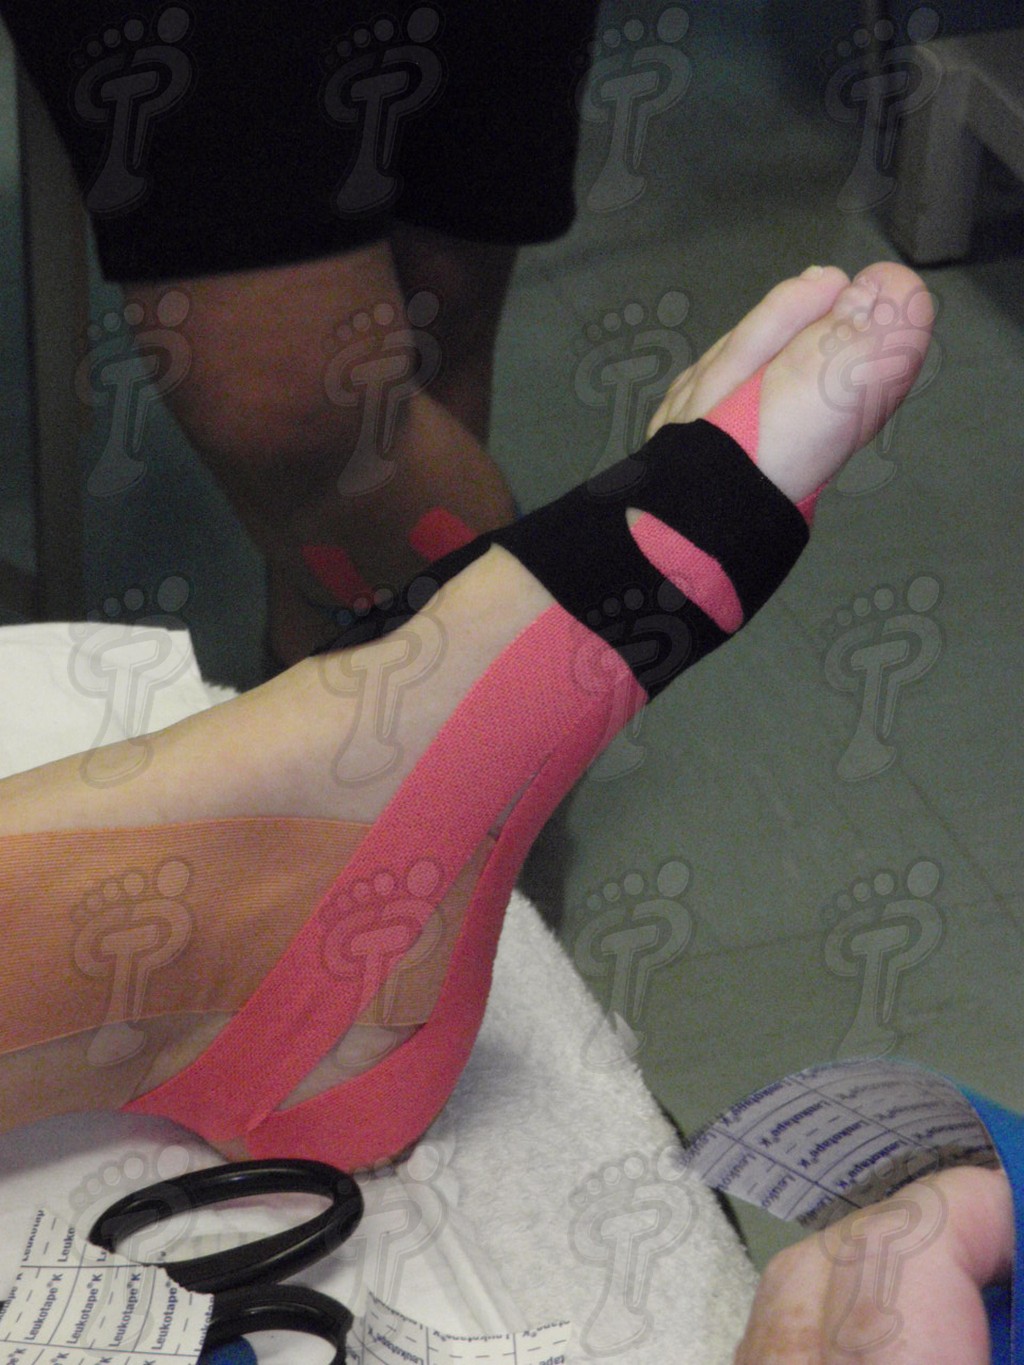 Application of neuromuscular bandages in the lower extremity